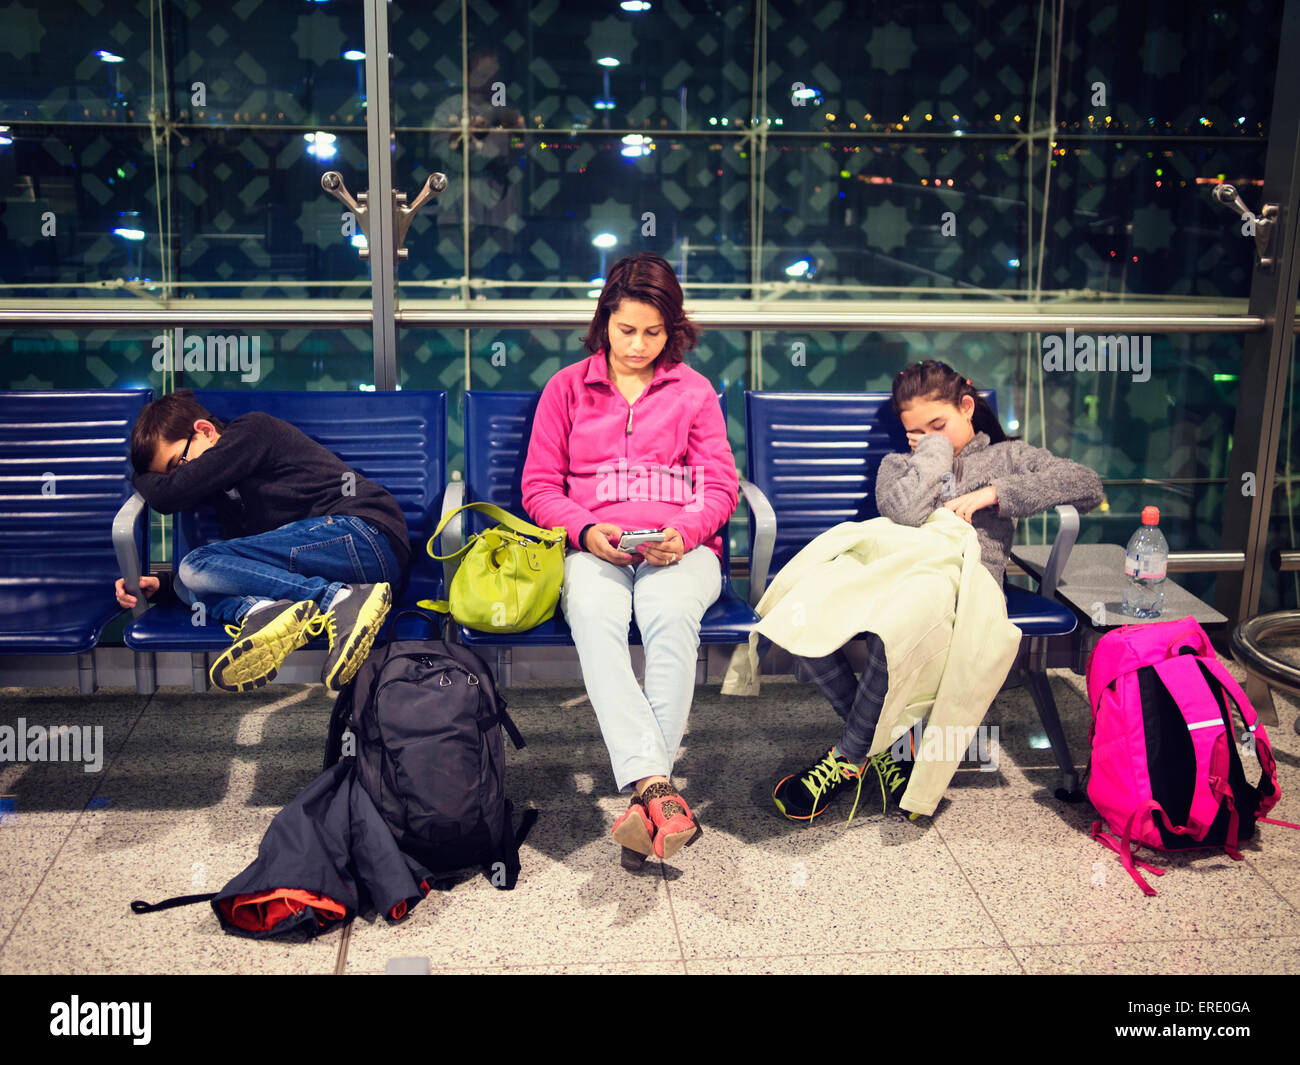 Mother and children relaxing in airport waiting area Stock Photo